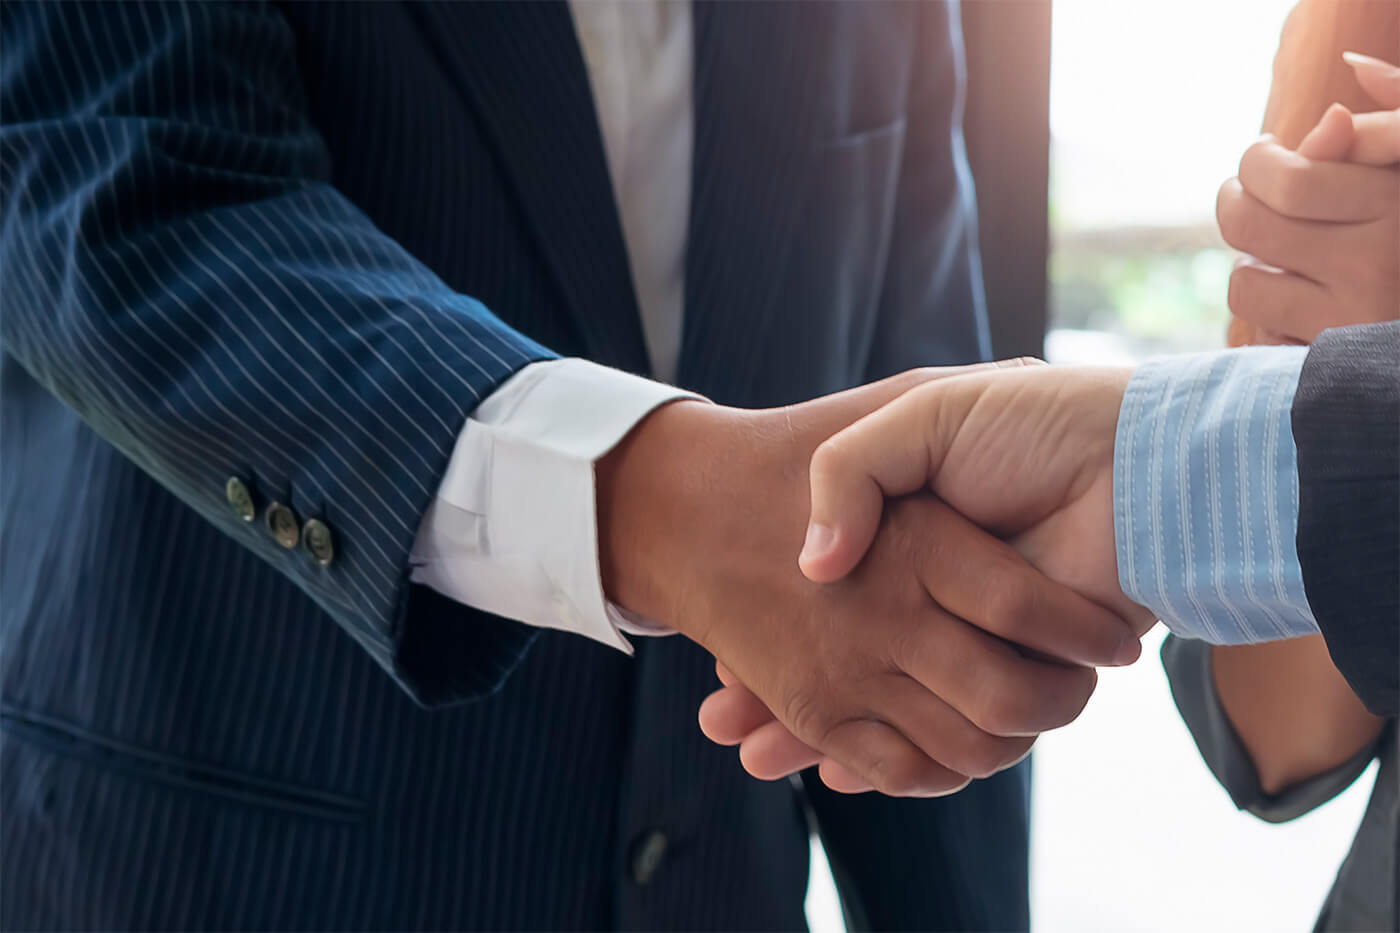 Close-up of two people in suits shaking hands, symbolizing agreements or partnerships, potentially related to discussions on escrow services, corporate actions, and corporate escrow support.